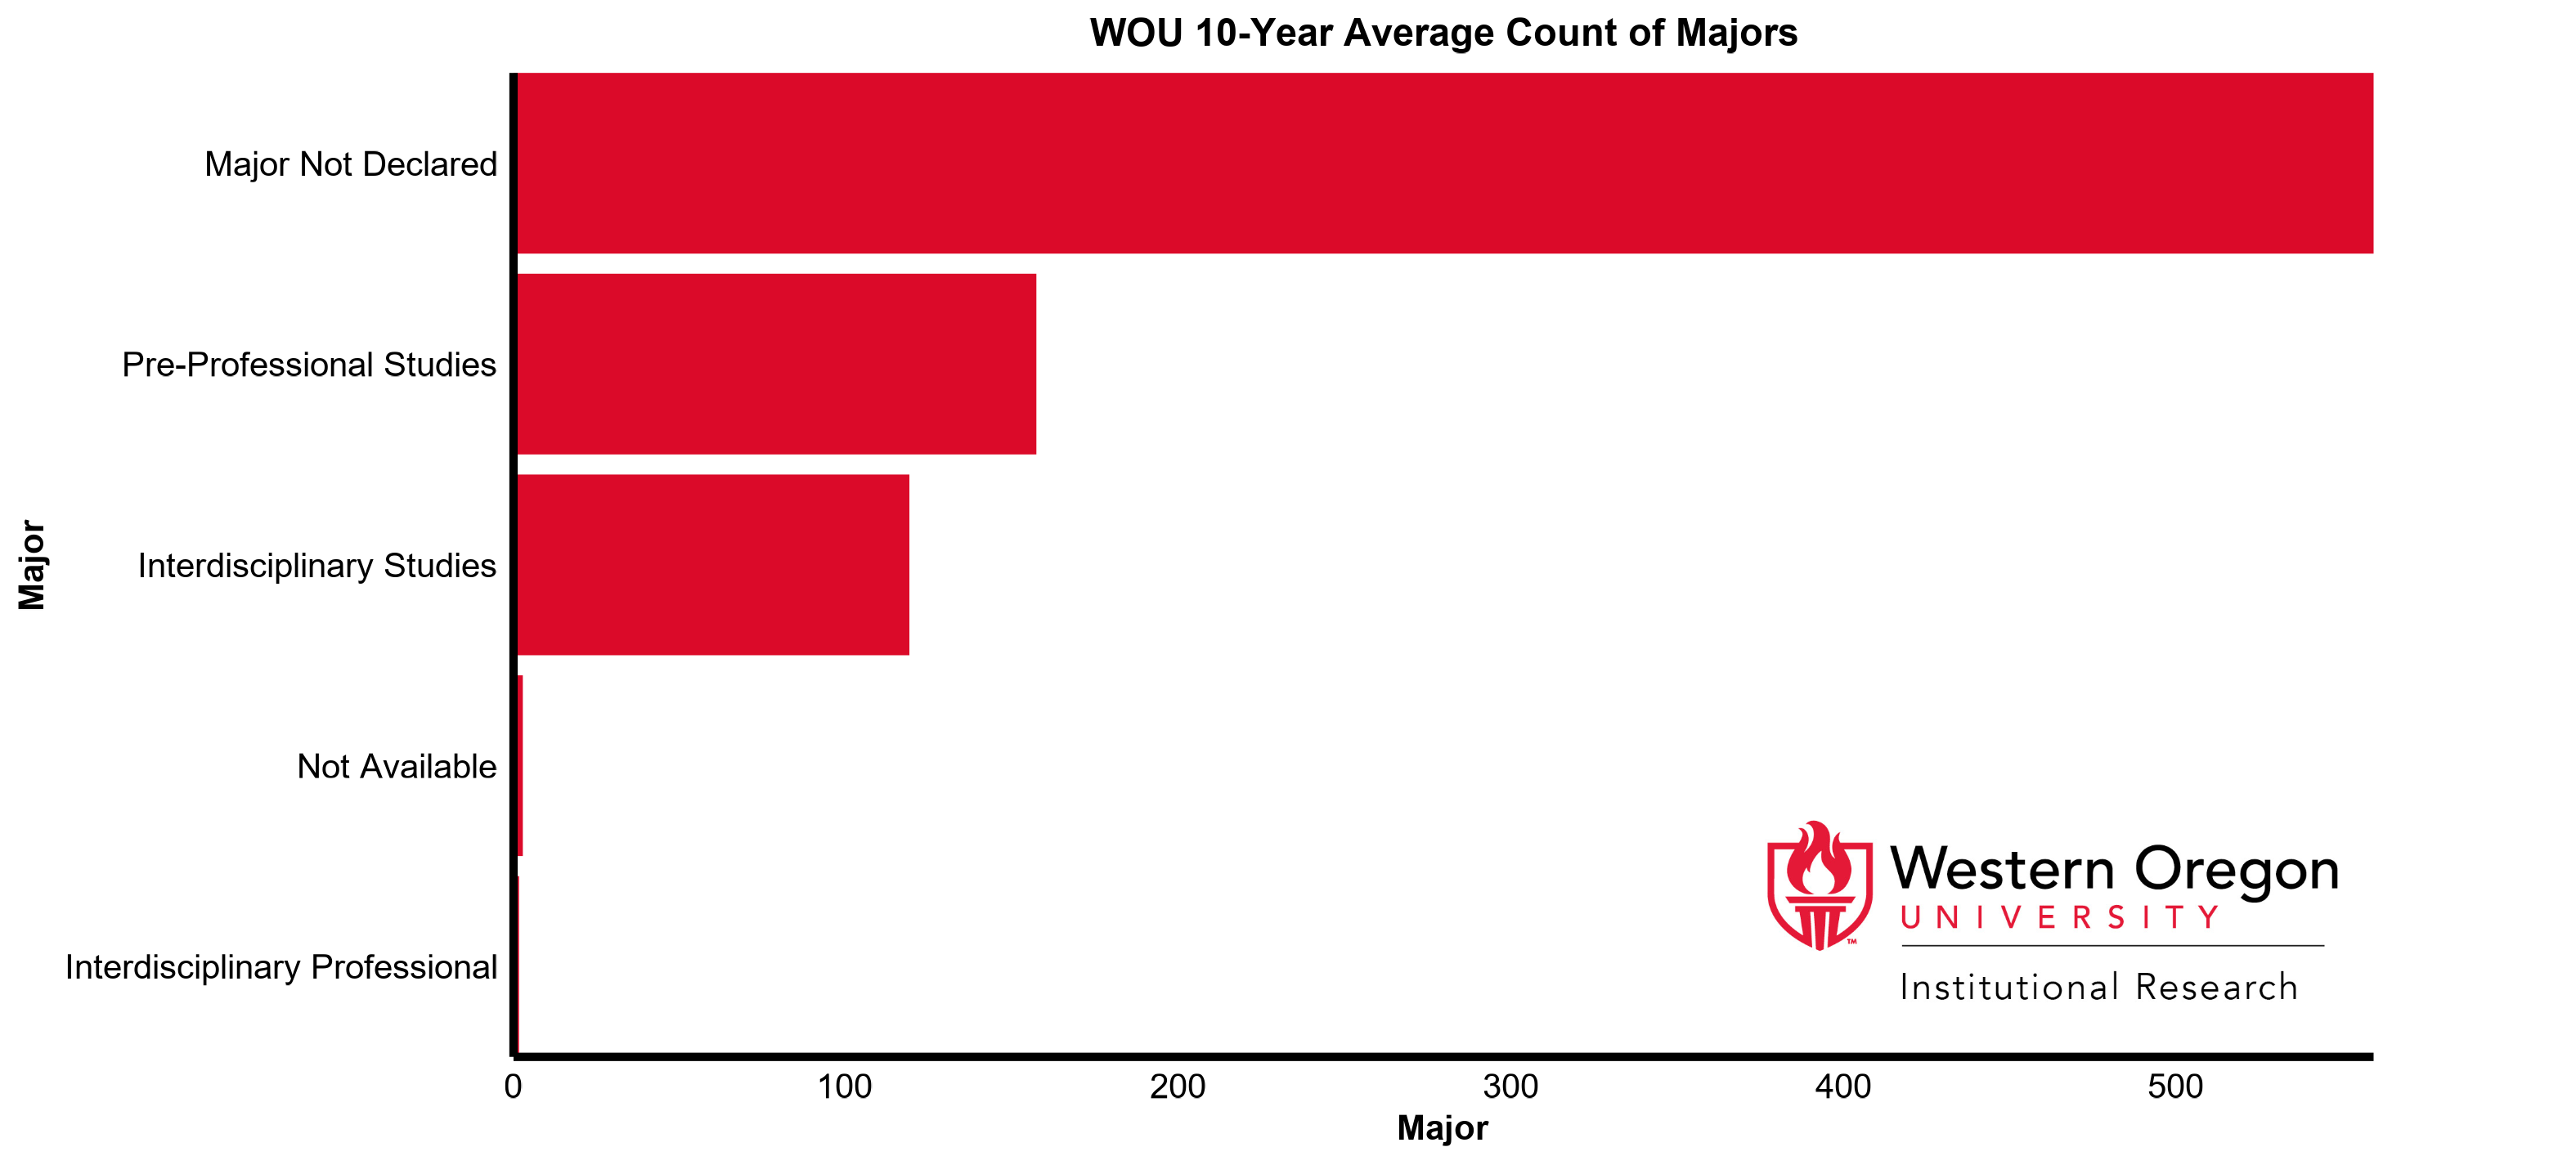 Bar graph of the 10-year average count of majors at WOU for majors without a division